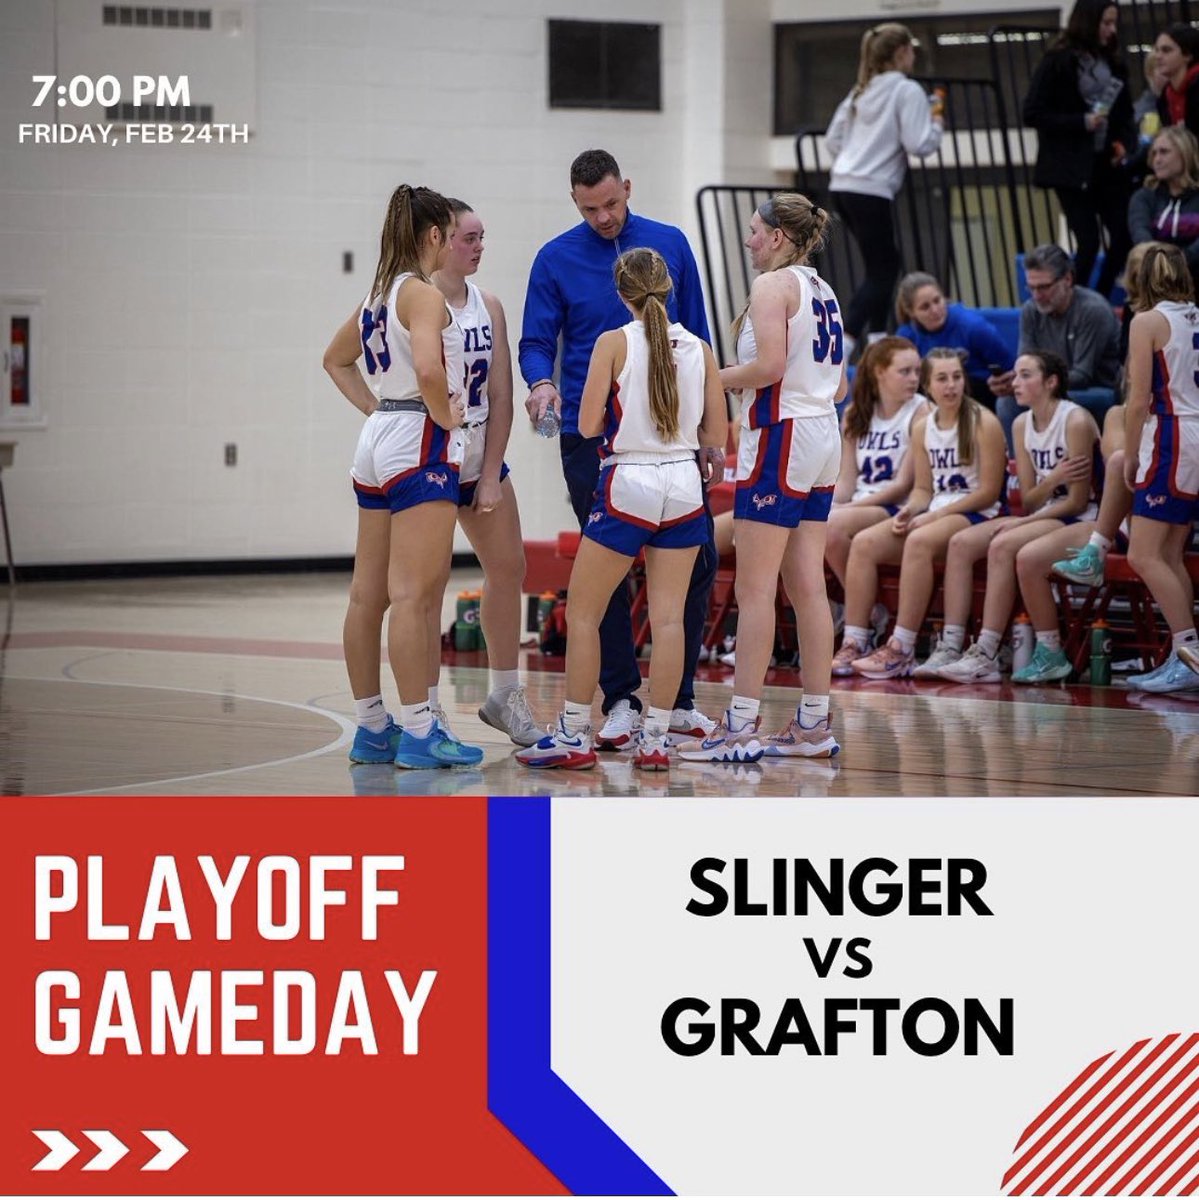 Playoffs!!?!? Playoffs!!??! 

That’s right! Playoffs begin for our #LadyOwls tonight in Grafton!!!

#OwlProud
#WeCan

🏀🦉♥️💙🏀🦉♥️💙